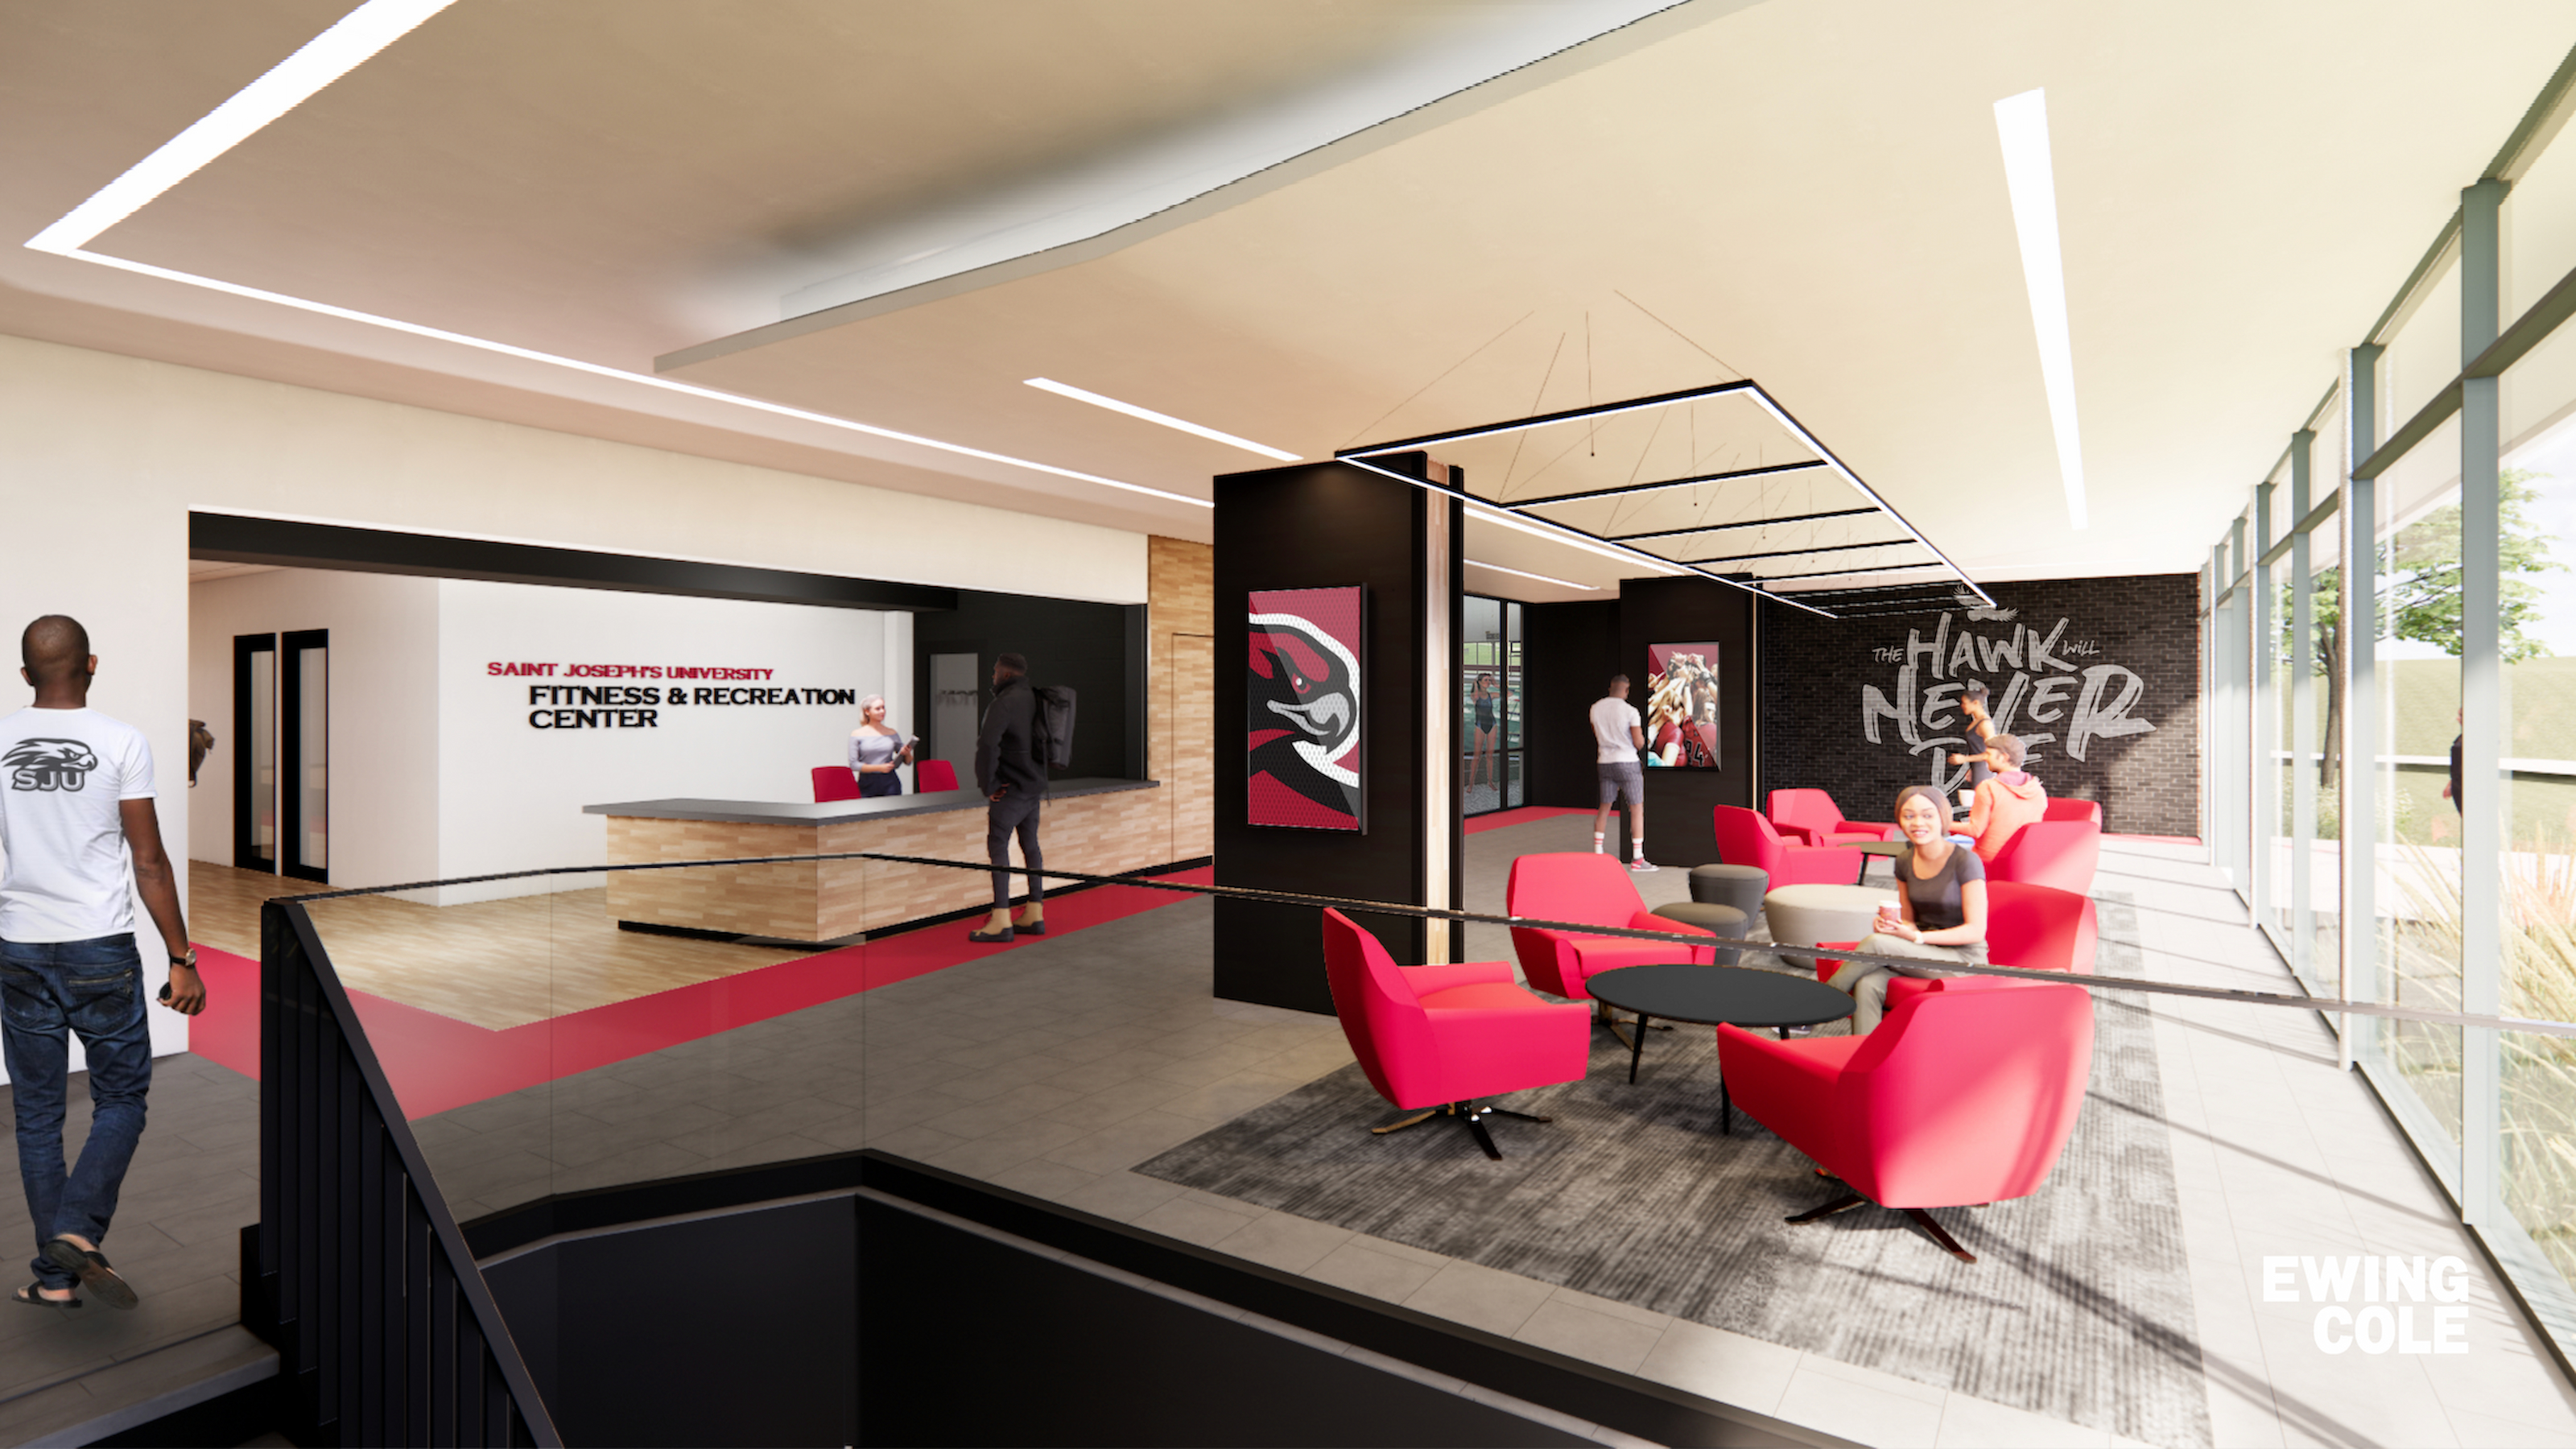 Welcoming common areas encourage conversations and connections with interactive displays and space to rest and recover.  The lobby space will transform the fitness and recreation center into a campus hub for building friendships, meeting new people and creating a sense of belonging. 